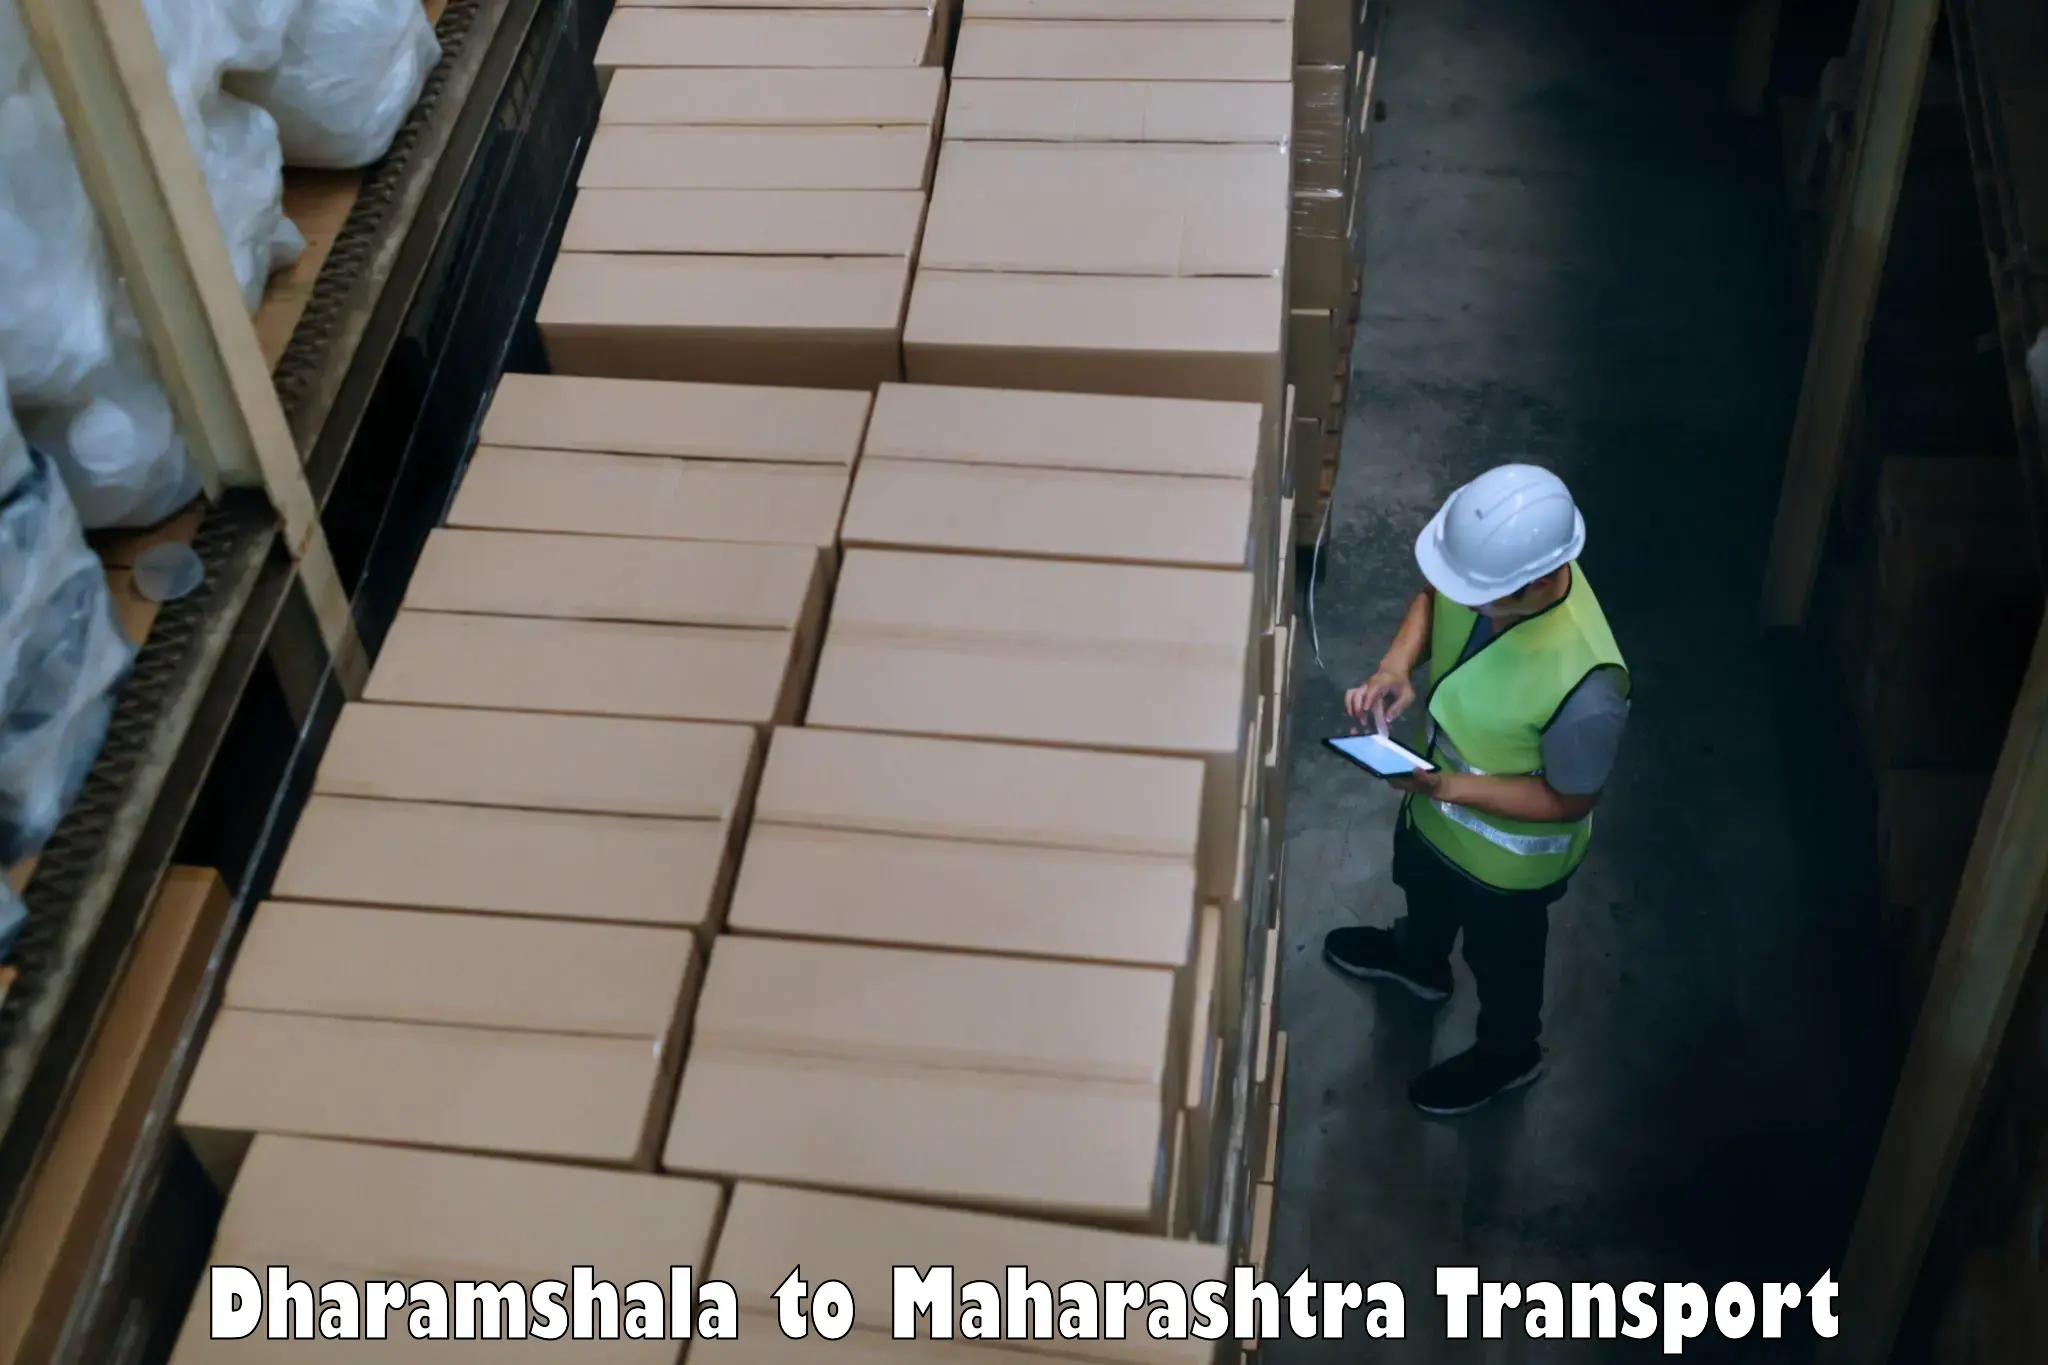 Transport bike from one state to another Dharamshala to Andheri